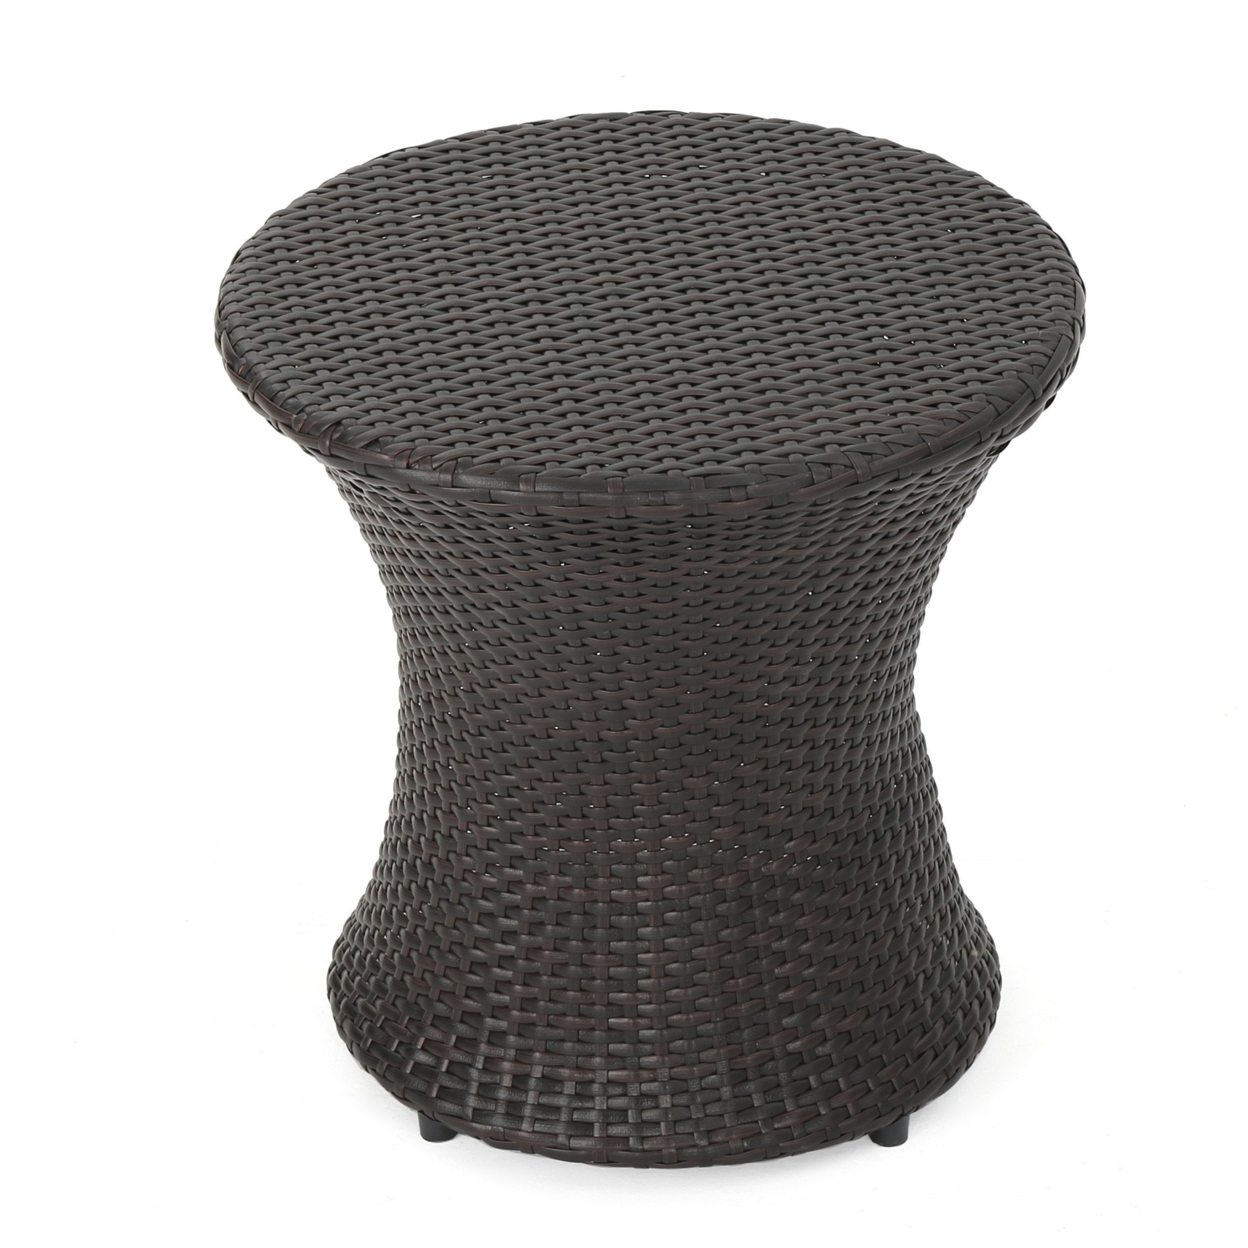 Capella Outdoor 3 Piece Multi-brown Wicker Stacking Chair Chat Set - Cylindrical Table, Brown